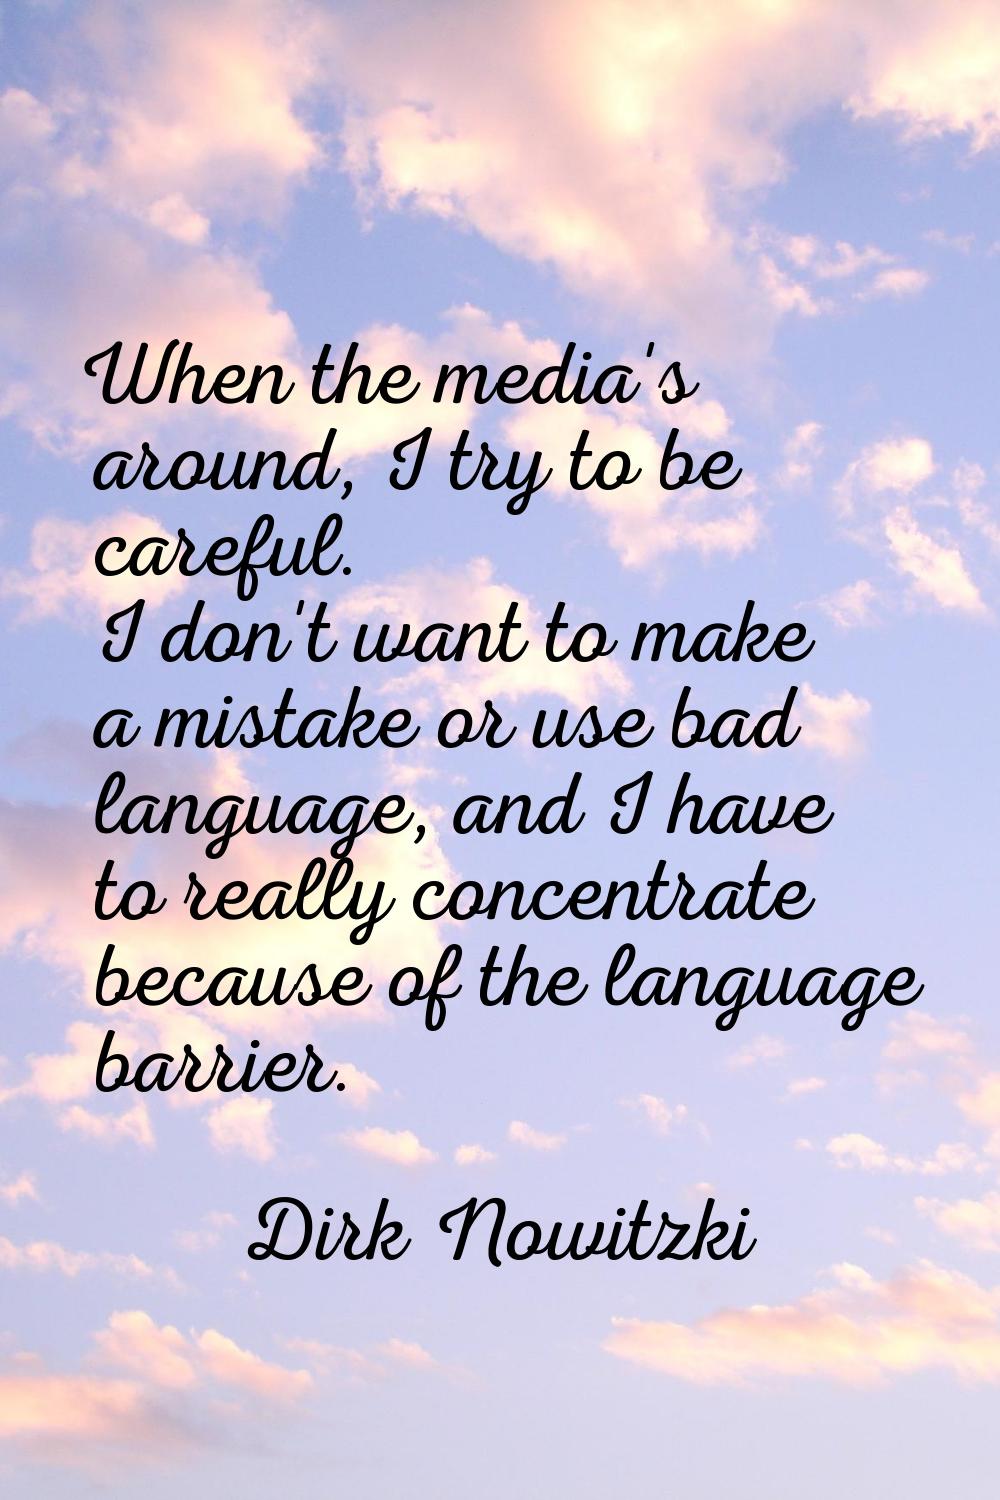 When the media's around, I try to be careful. I don't want to make a mistake or use bad language, a